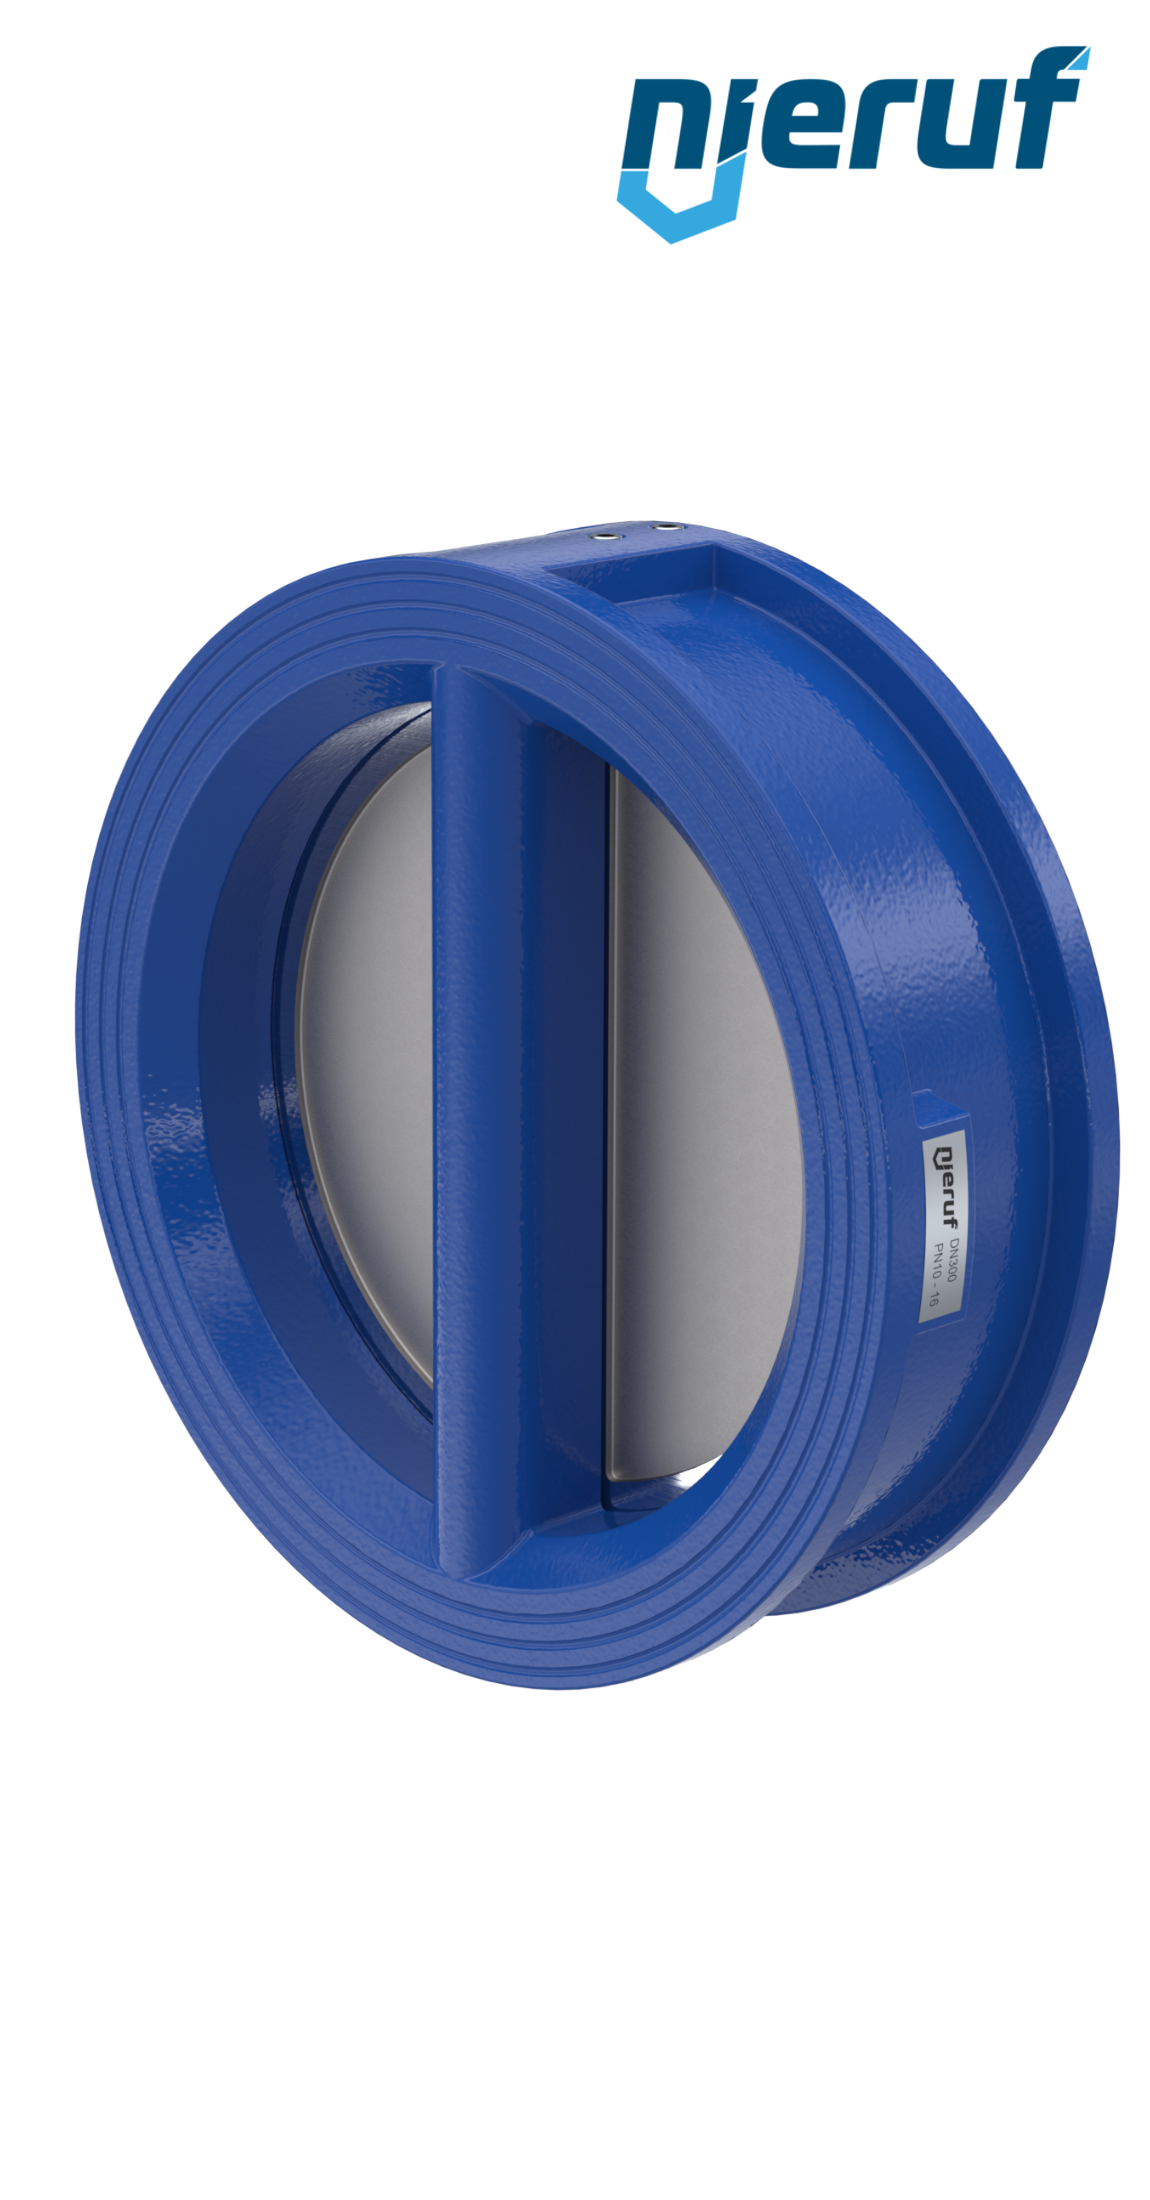 dual plate check valve DN300 DR01 GGG40 epoxyd plated blue 180µm EPDM